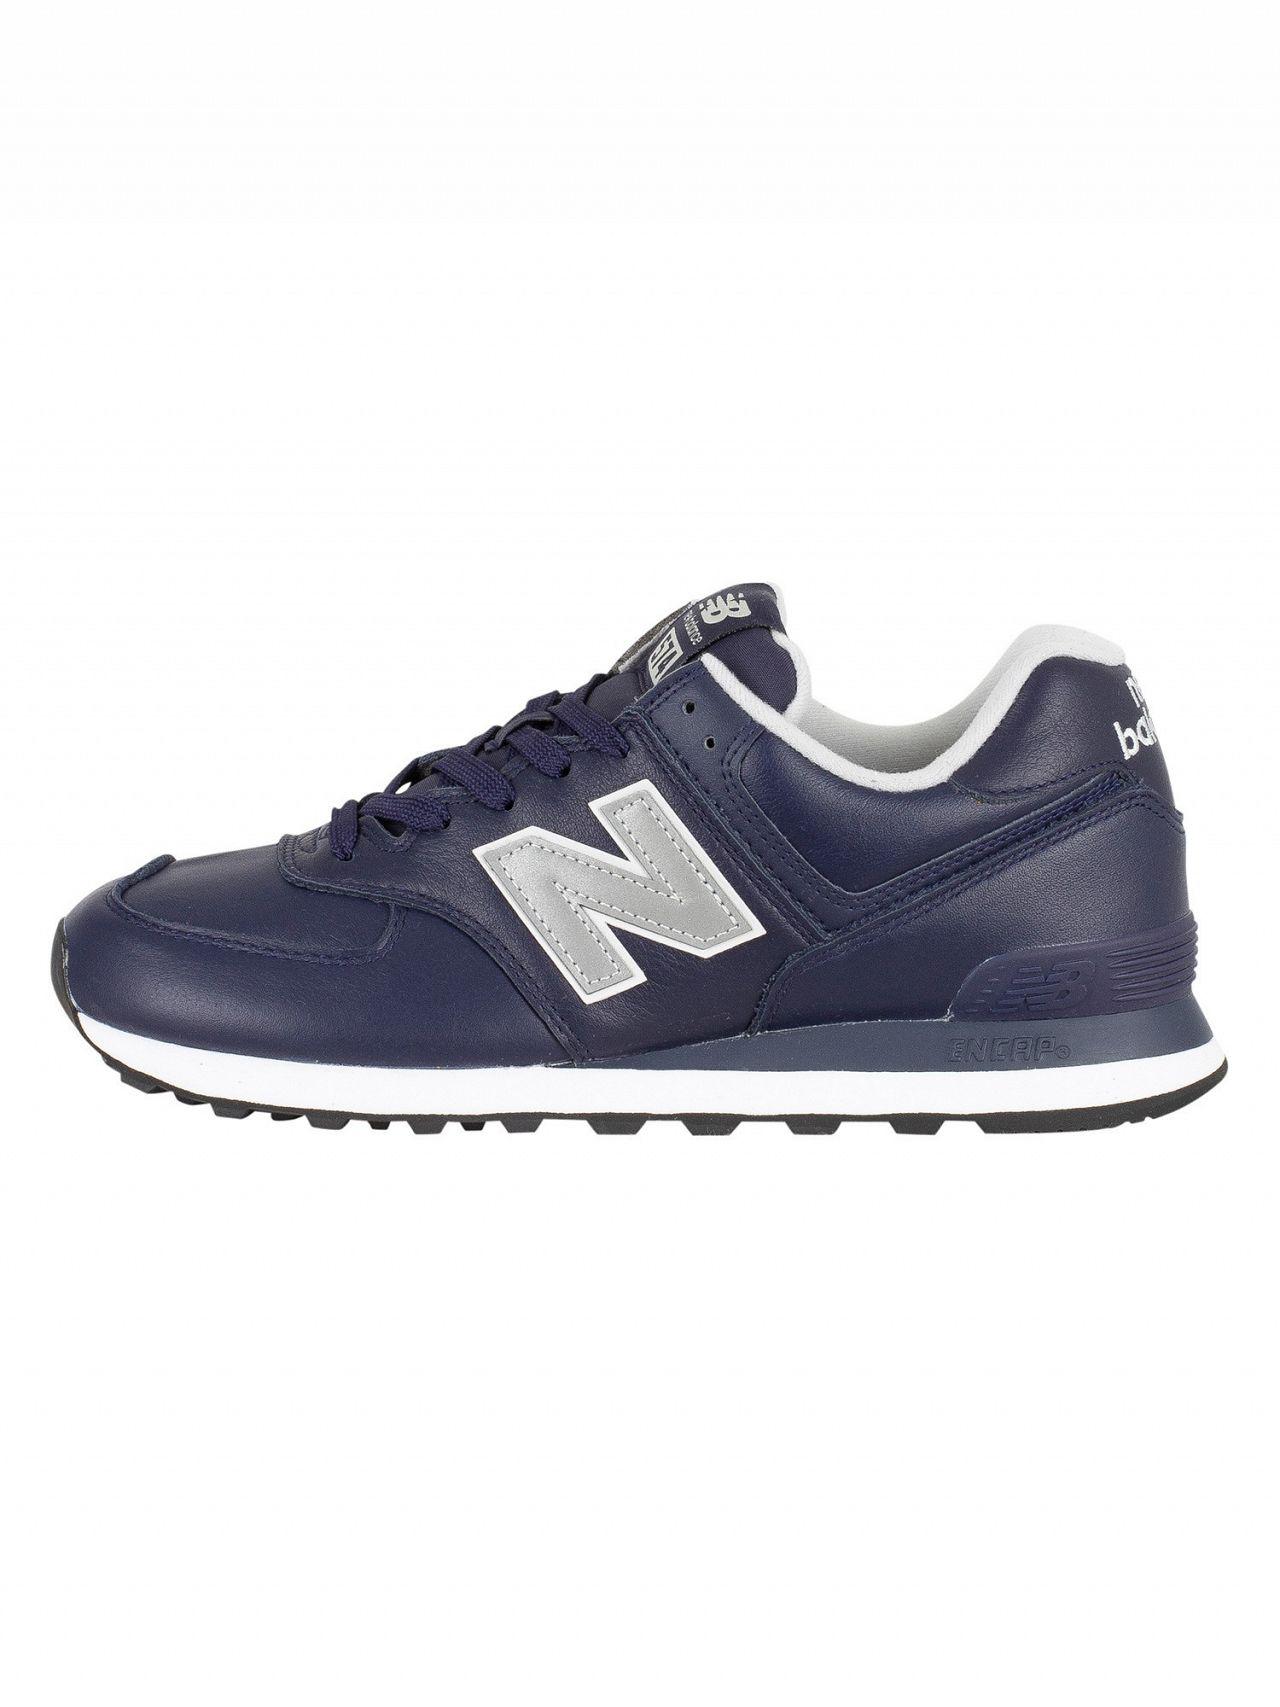 New Balance Navy 574 Leather Trainers 